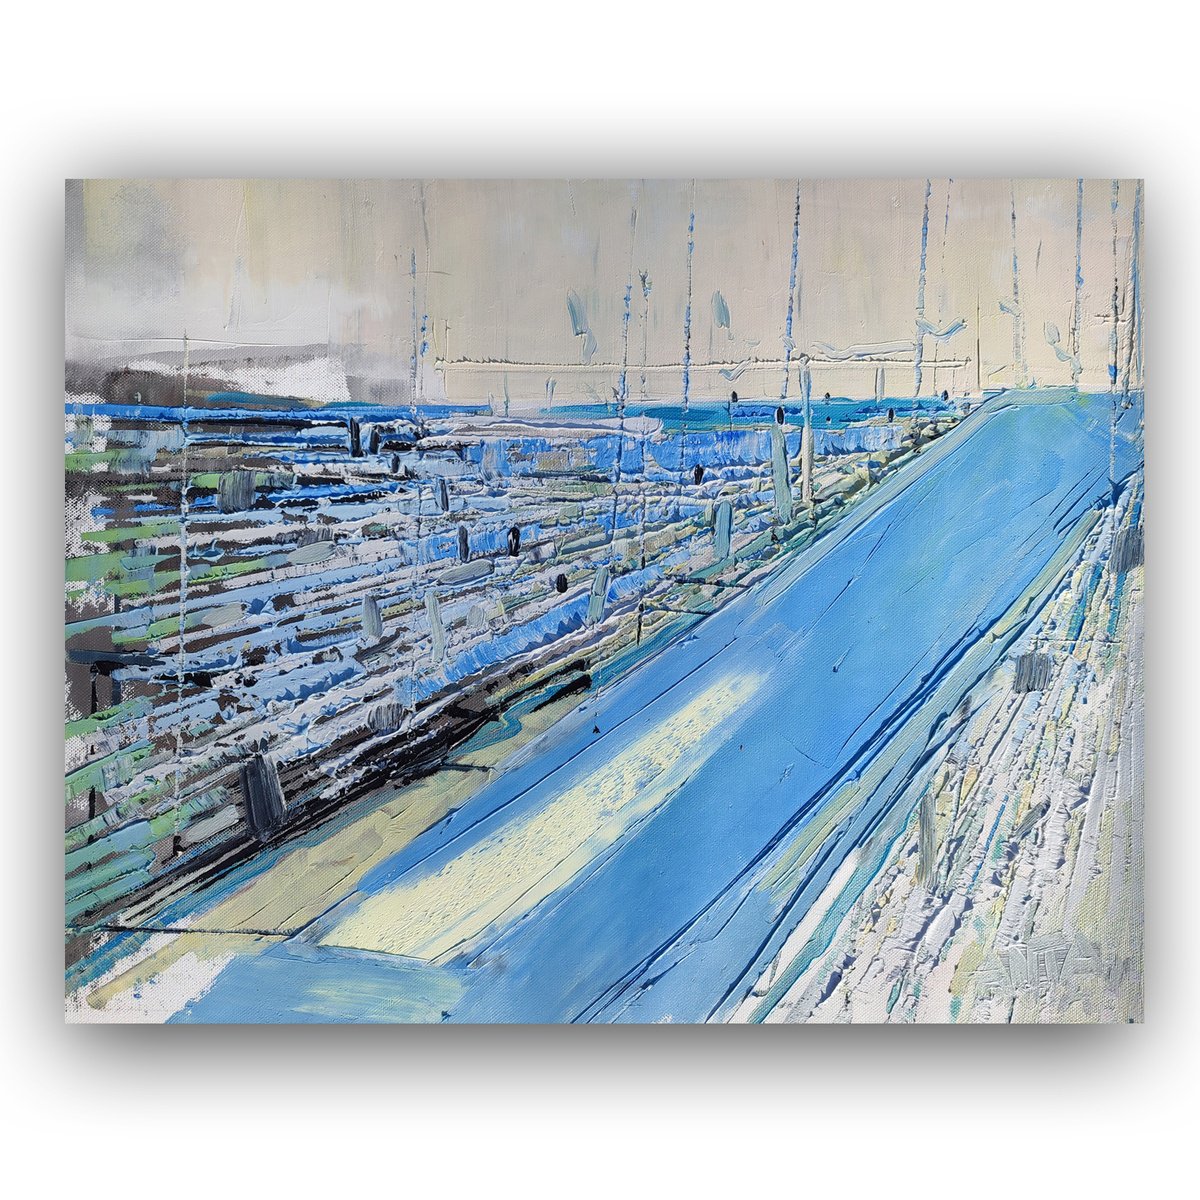 Abstract oil painting City lines 5. Size 15,7/19,7 inches, 40/50cm, stretched by Kariko ono